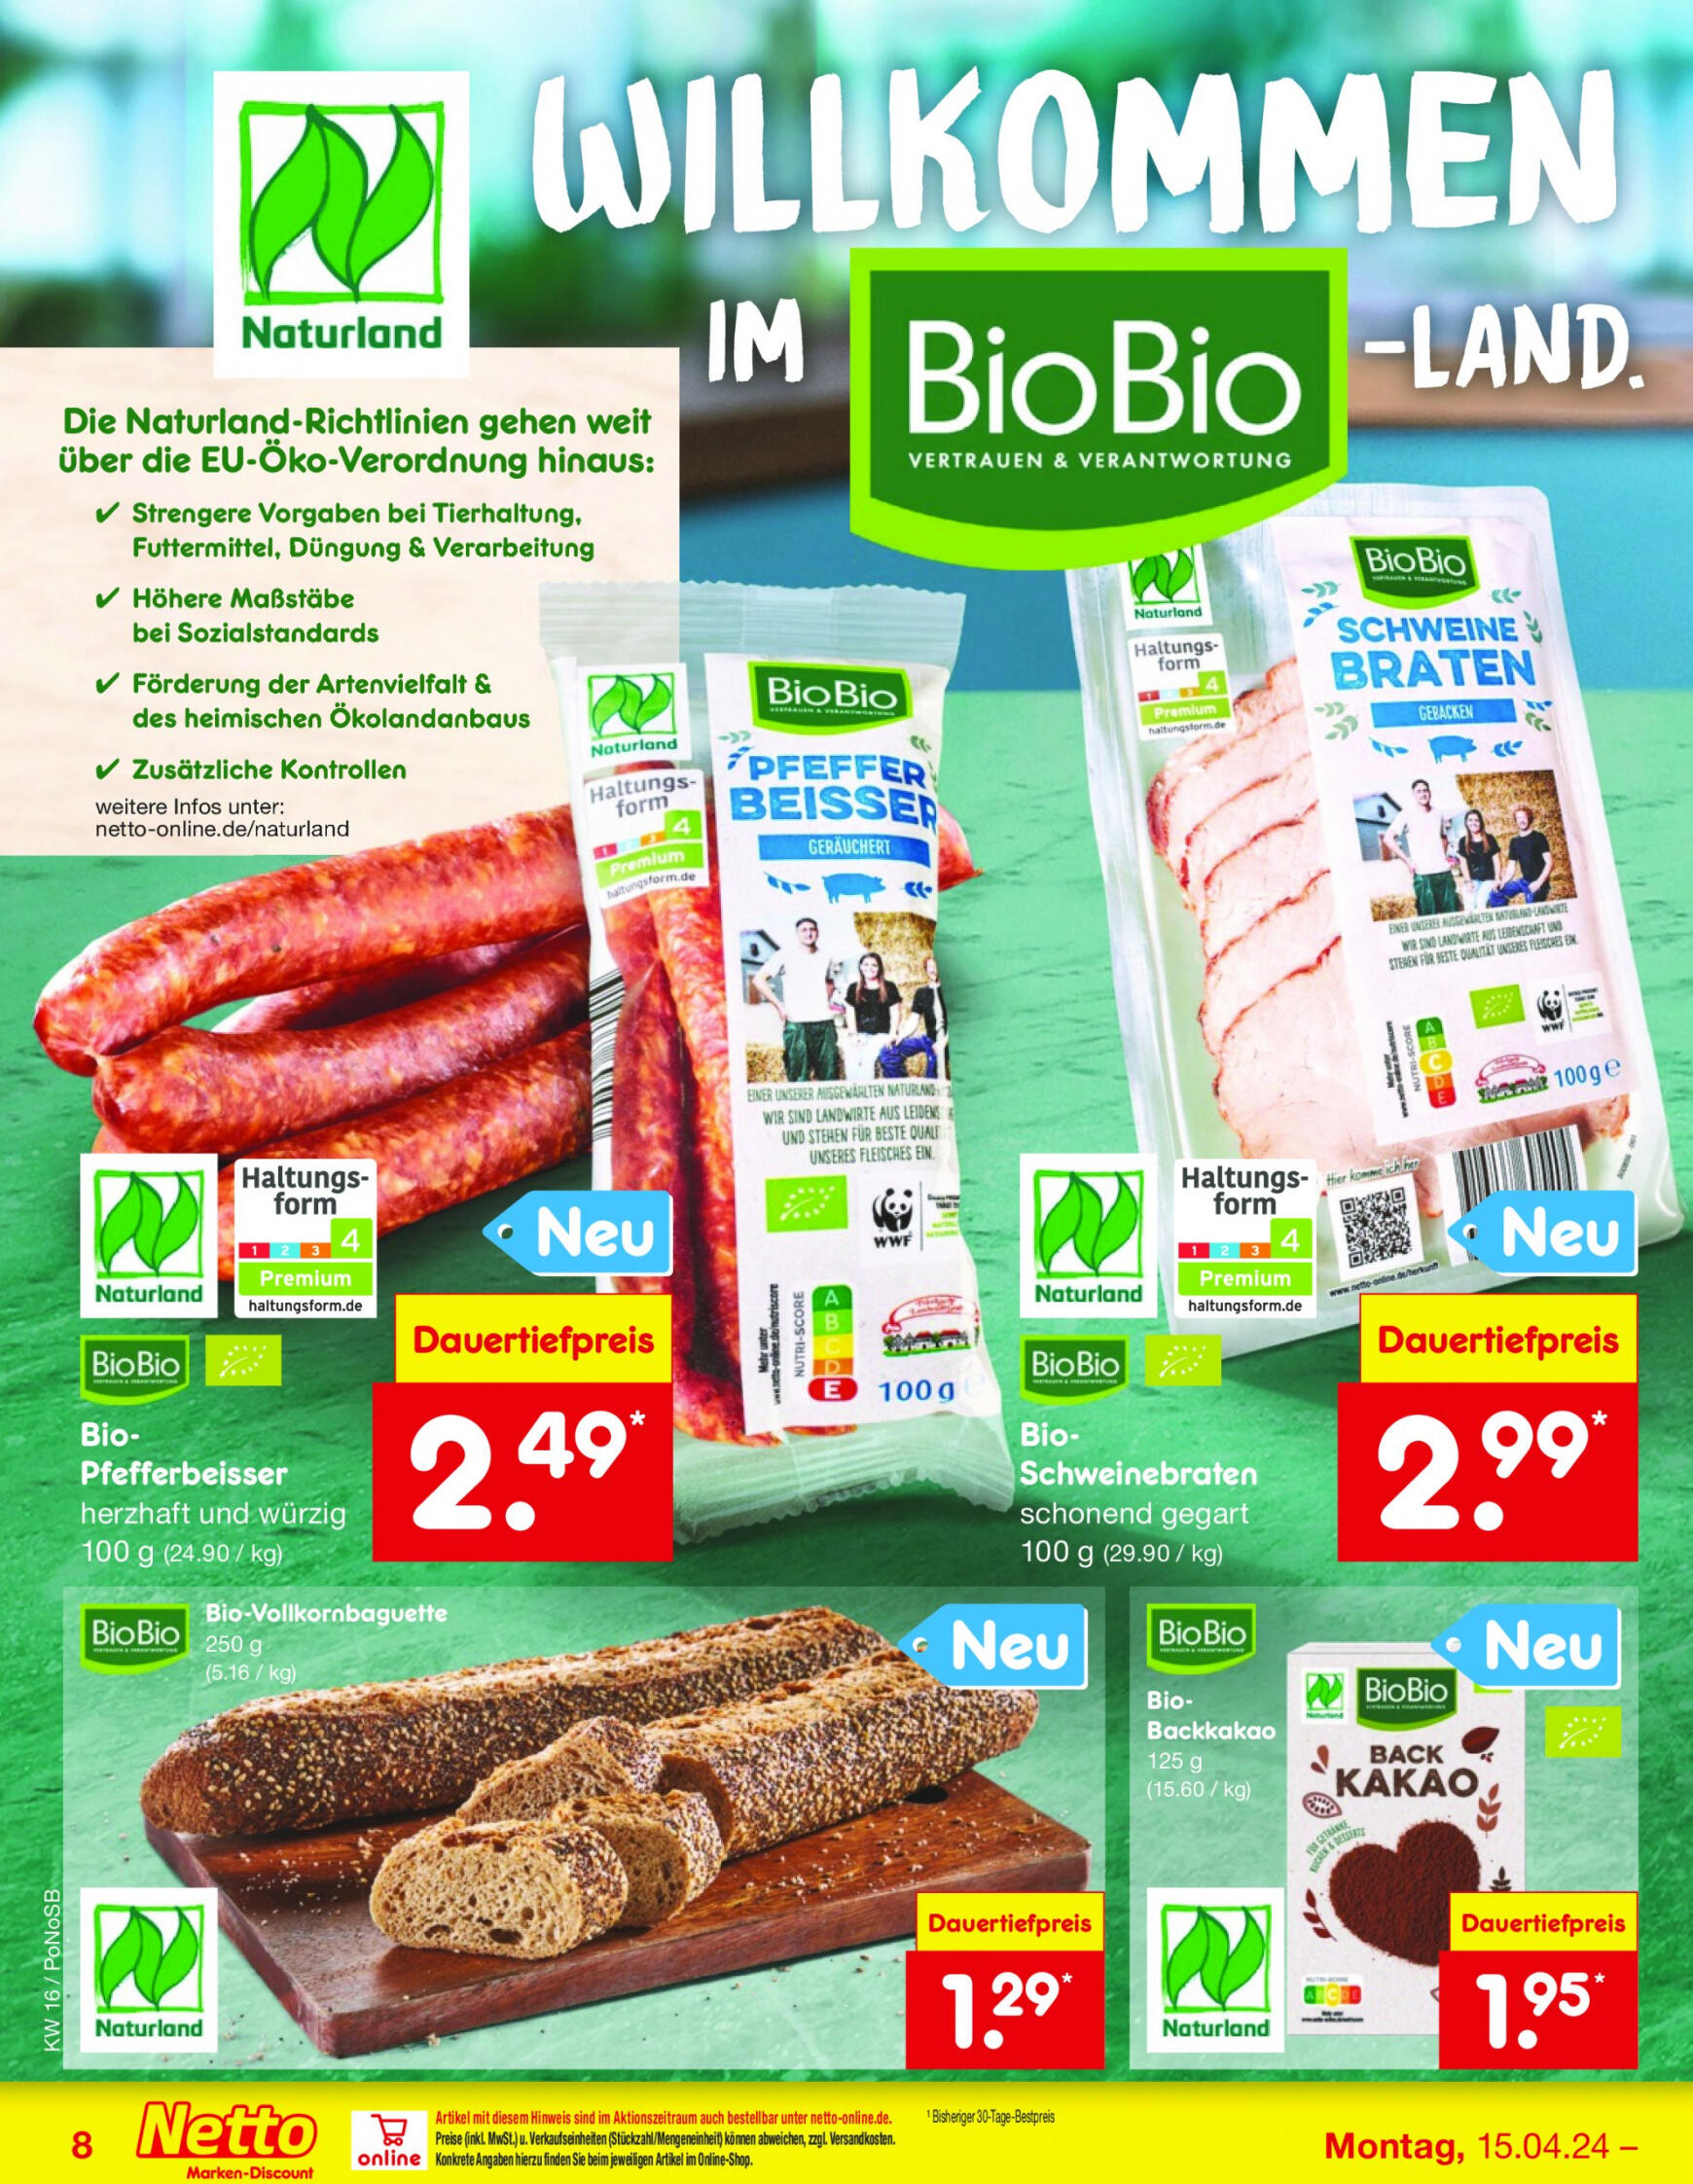 netto - Flyer Netto aktuell 15.04. - 20.04. - page: 8